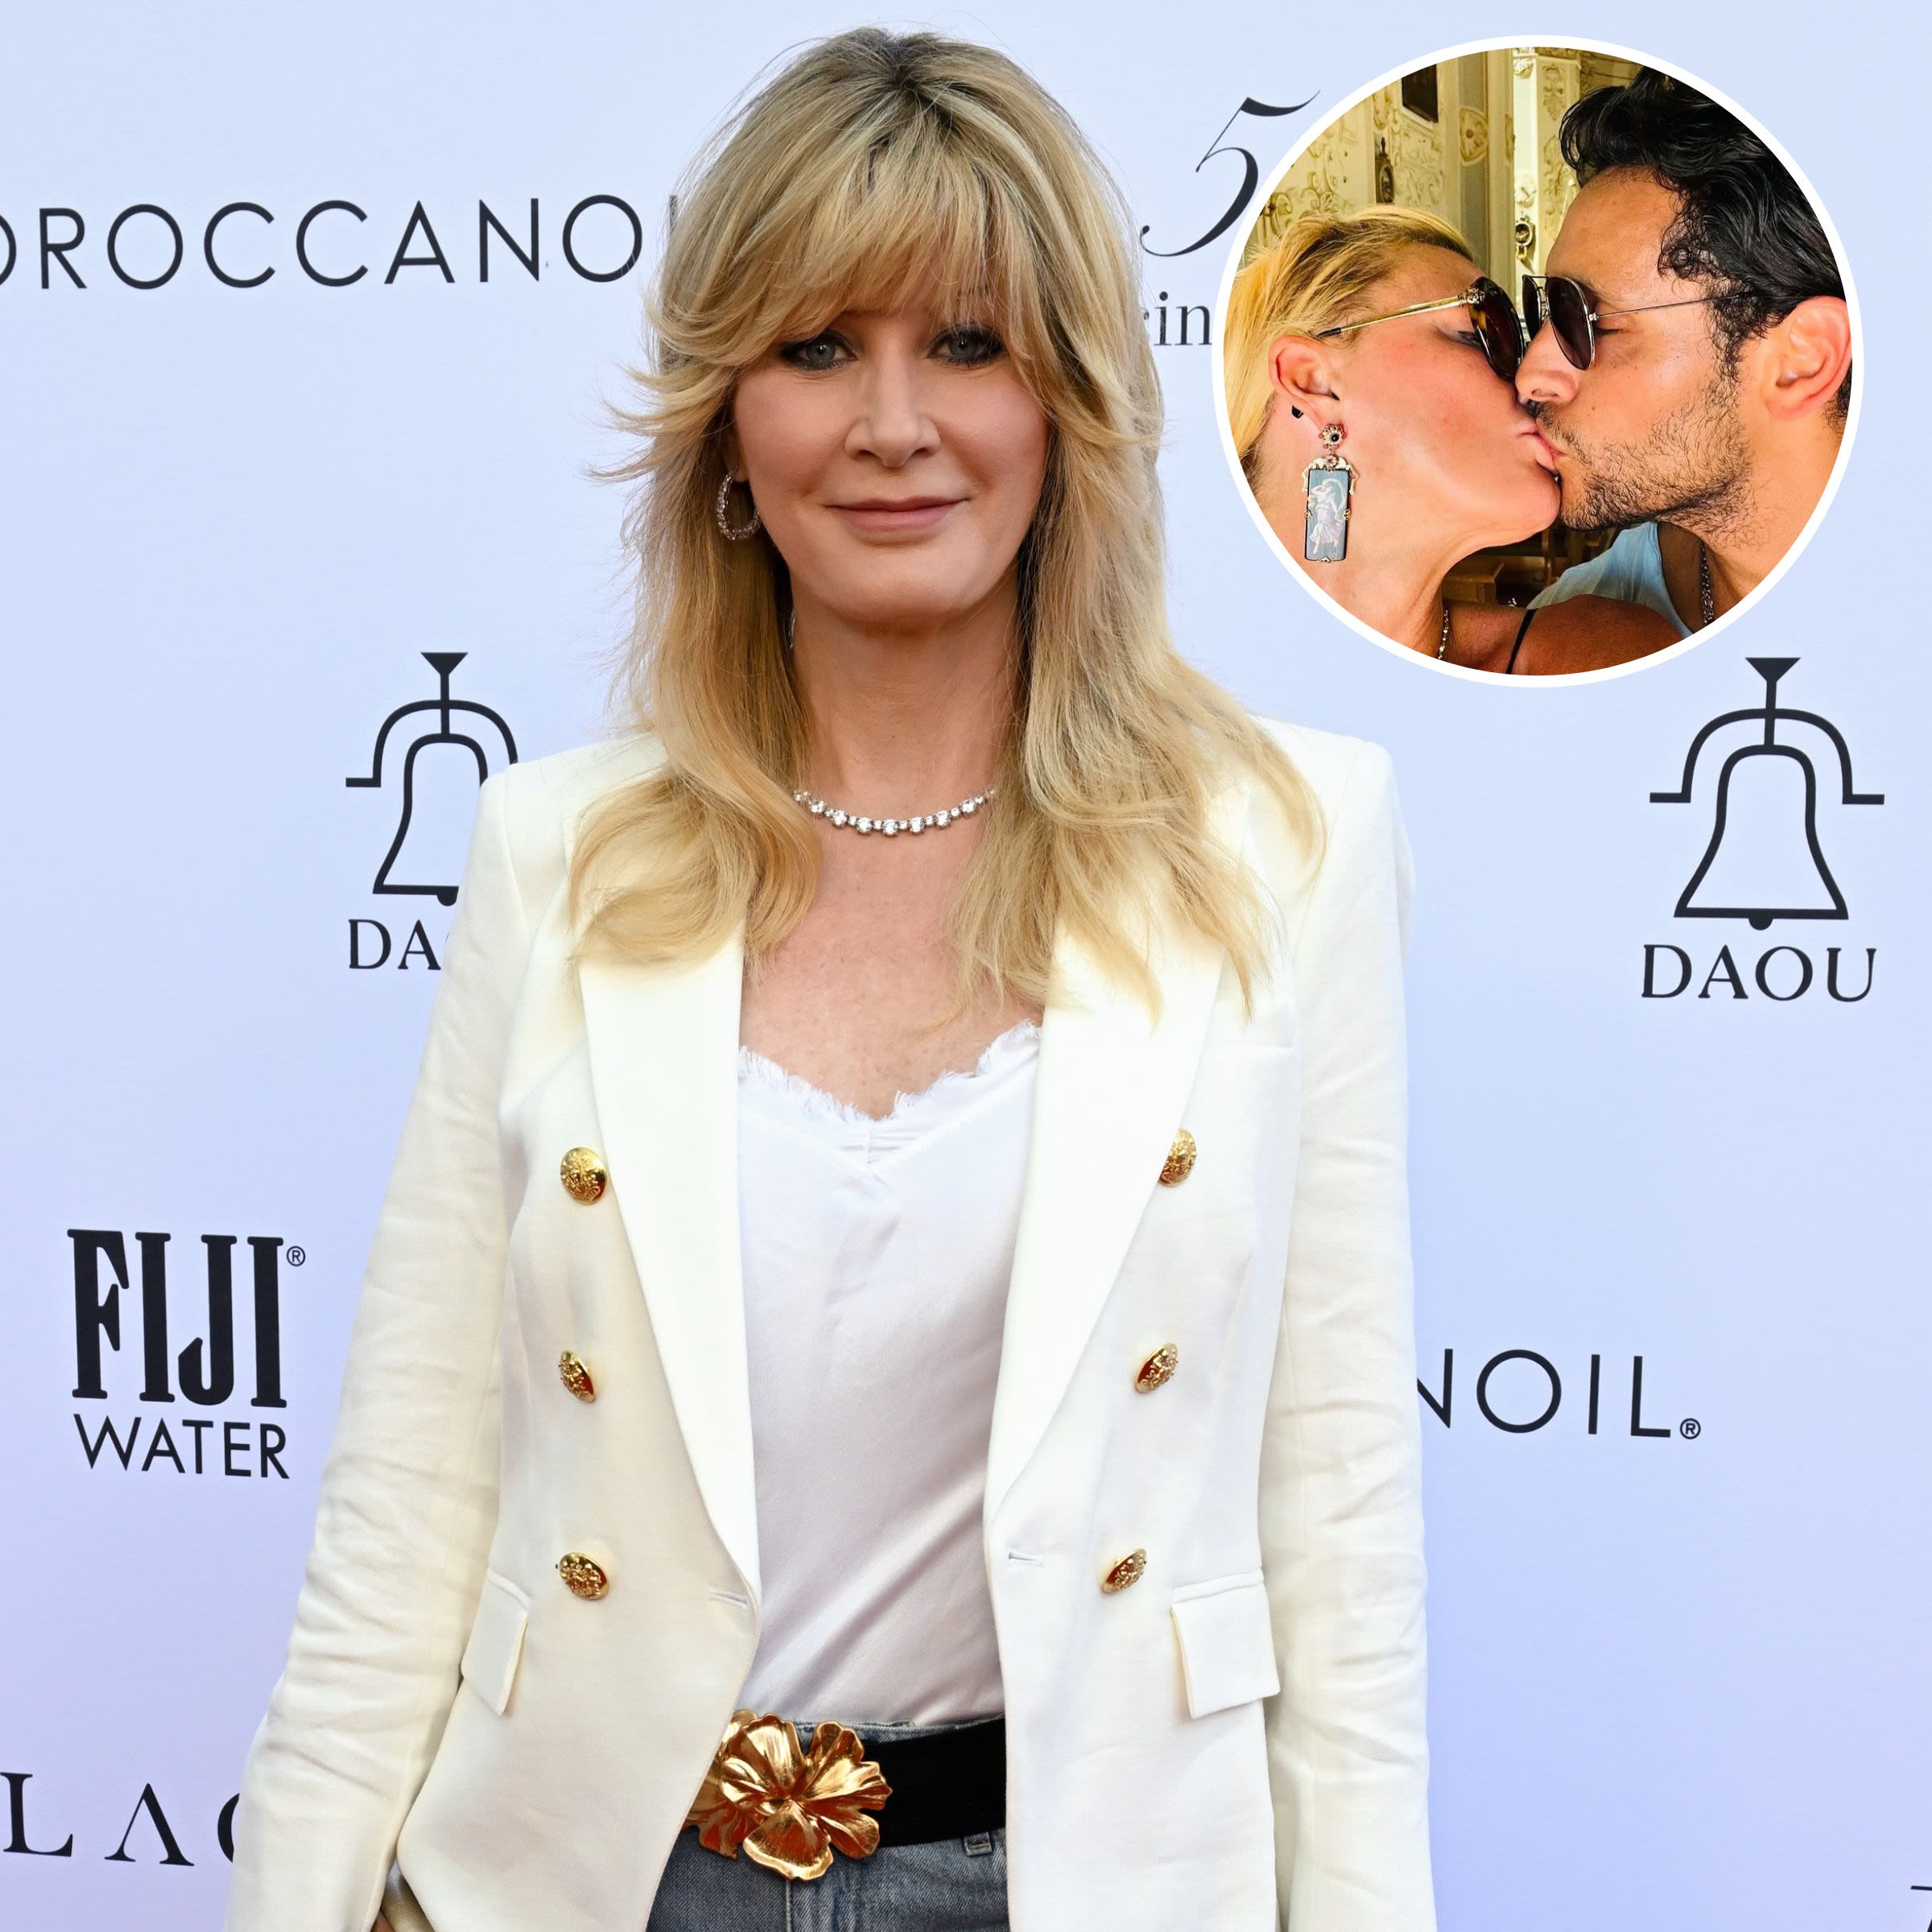 Chef Sandra Lee Shares PDA Photos With Boyfriend Ben Youcef to Celebrate Her 58th Birthday